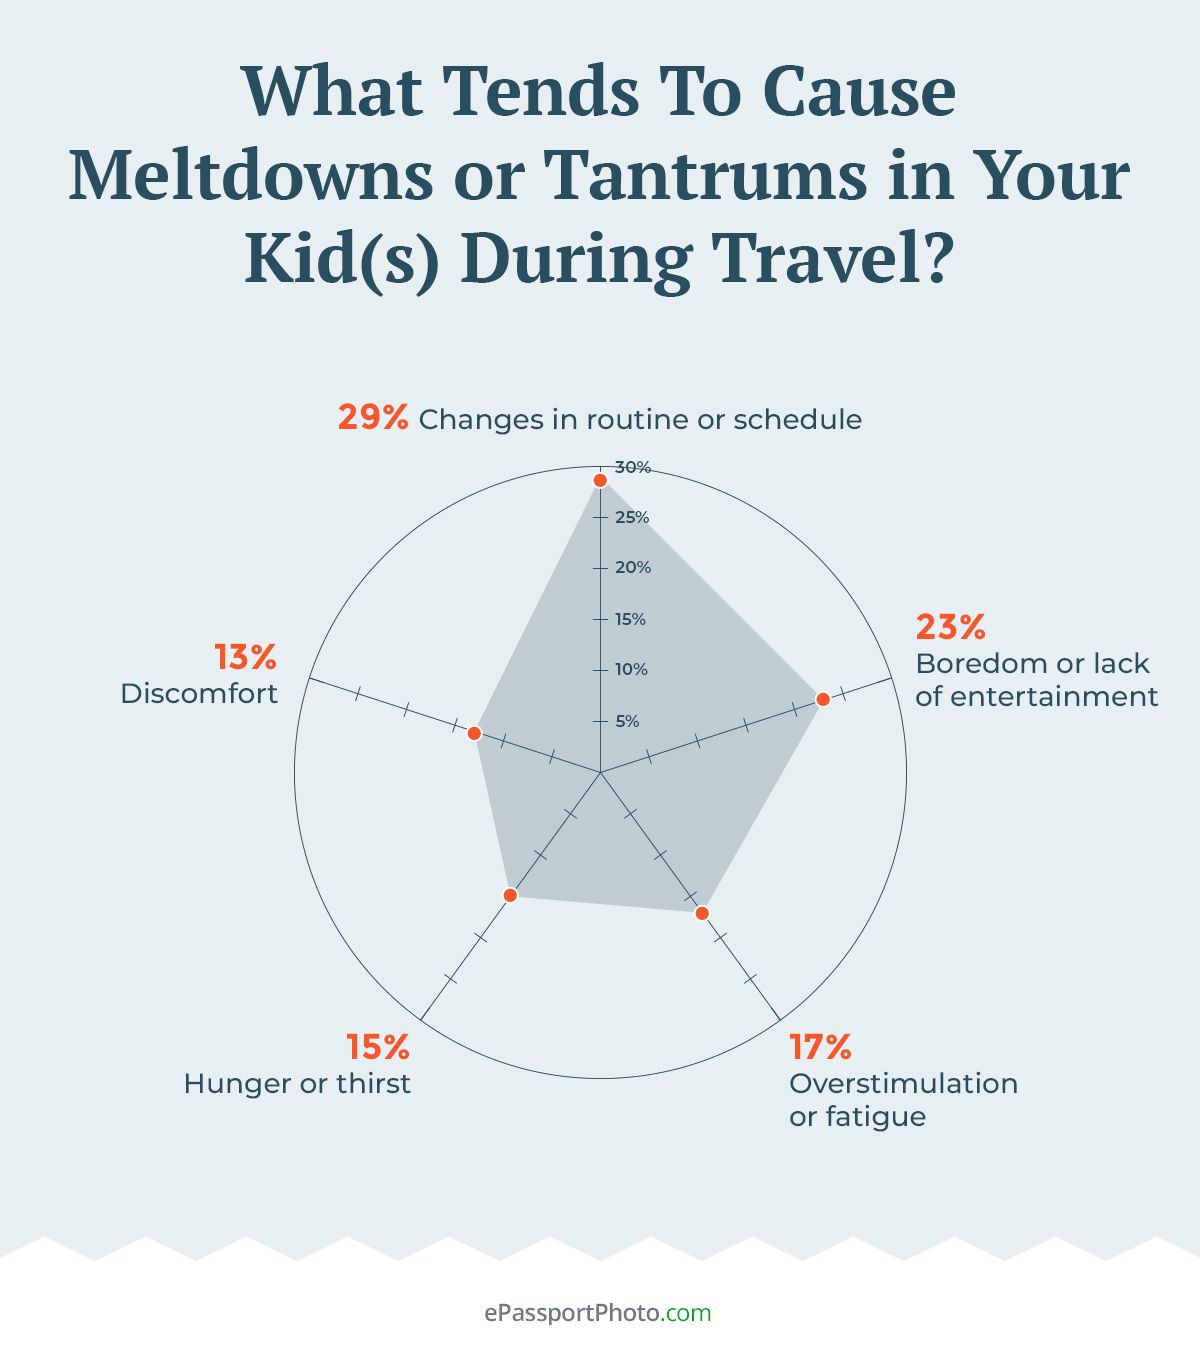 changes in routine or schedule (29%) are the top trigger for meltdowns or tantrums in children during travel